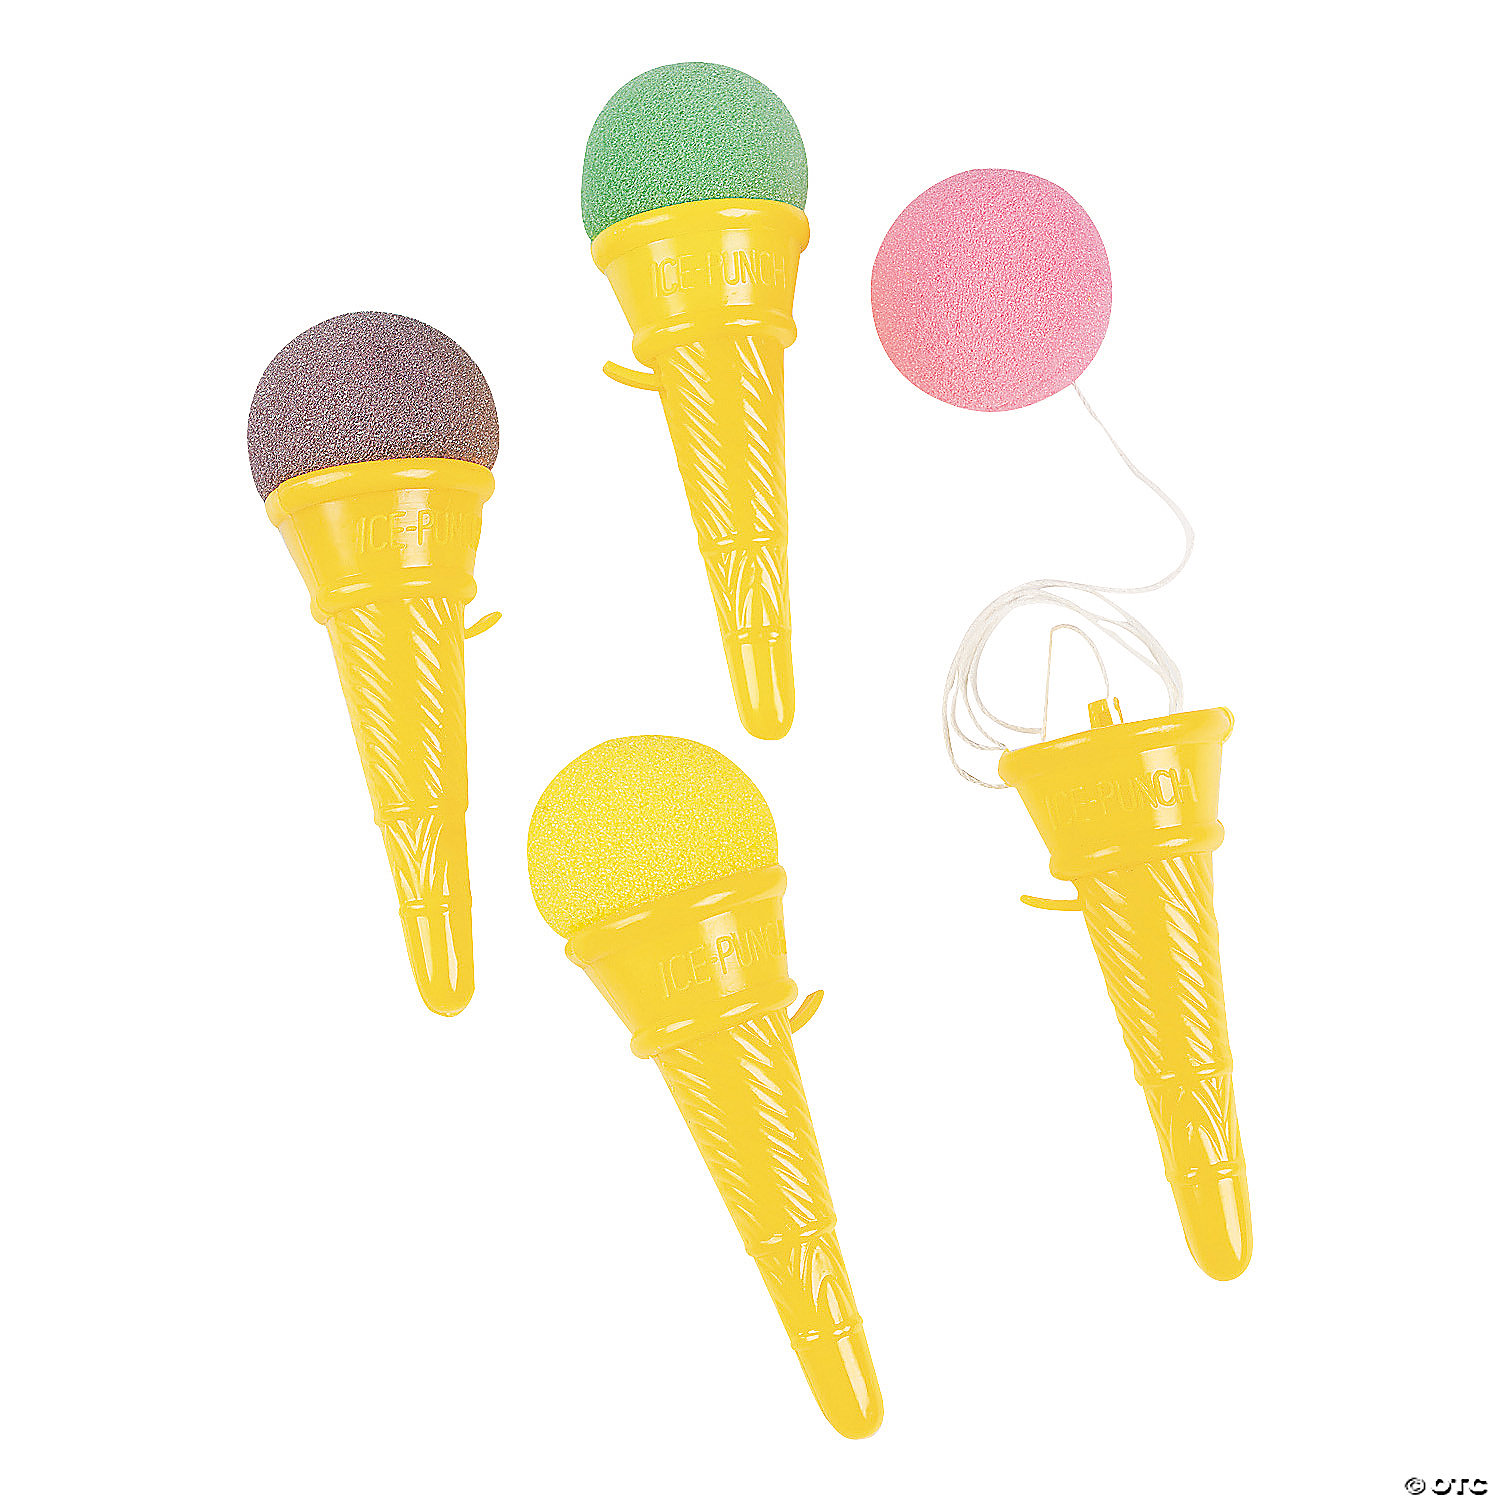 Dazzling Toys 4 Ice Cream Shooters Pack of 12-4 Inch Overall Size Plastic Cone and Foam Ball on a String 